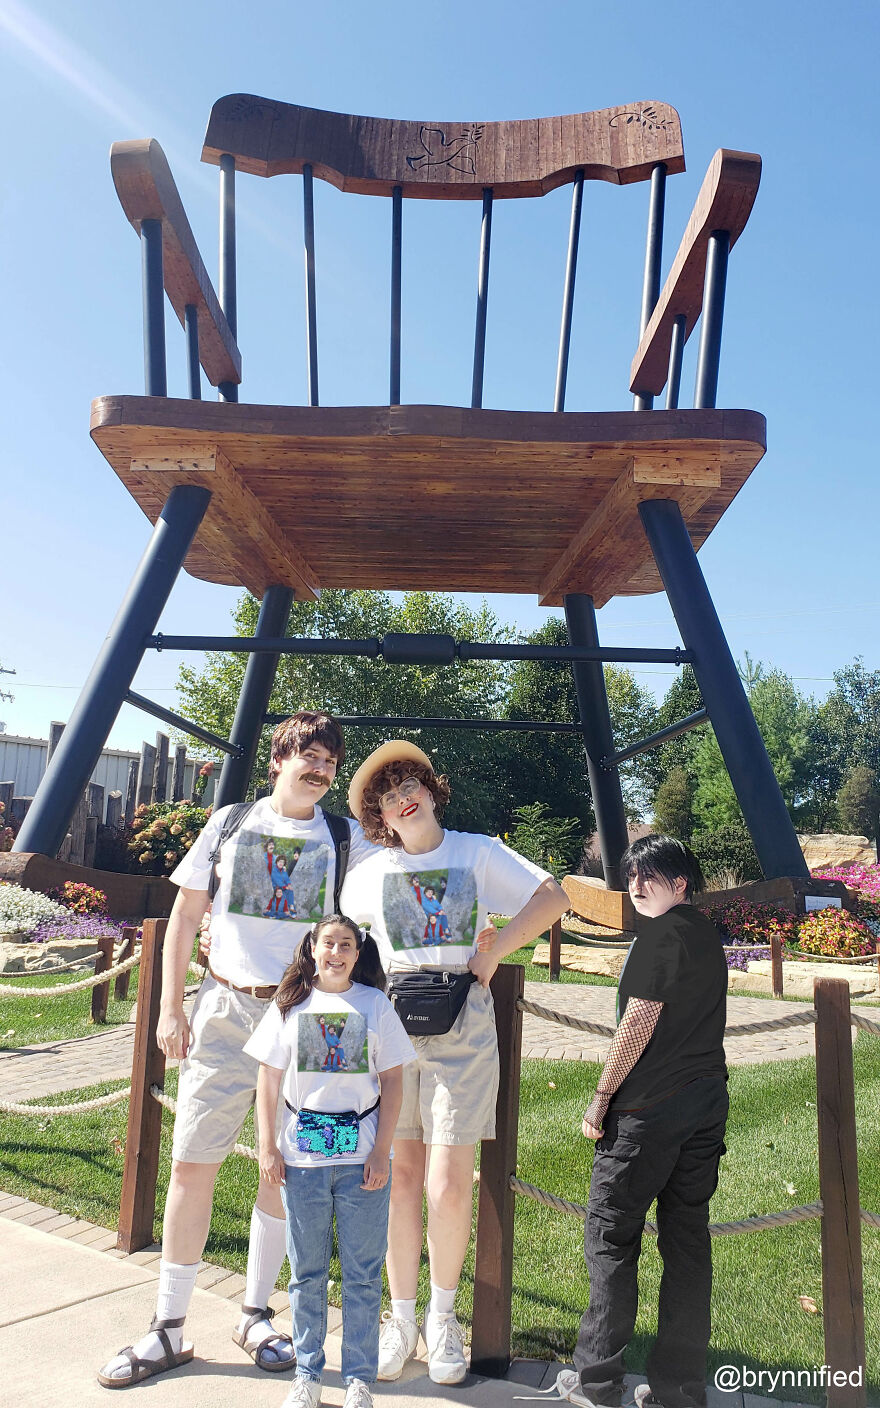 The World's Largest Rocking Chair—Casey, IL